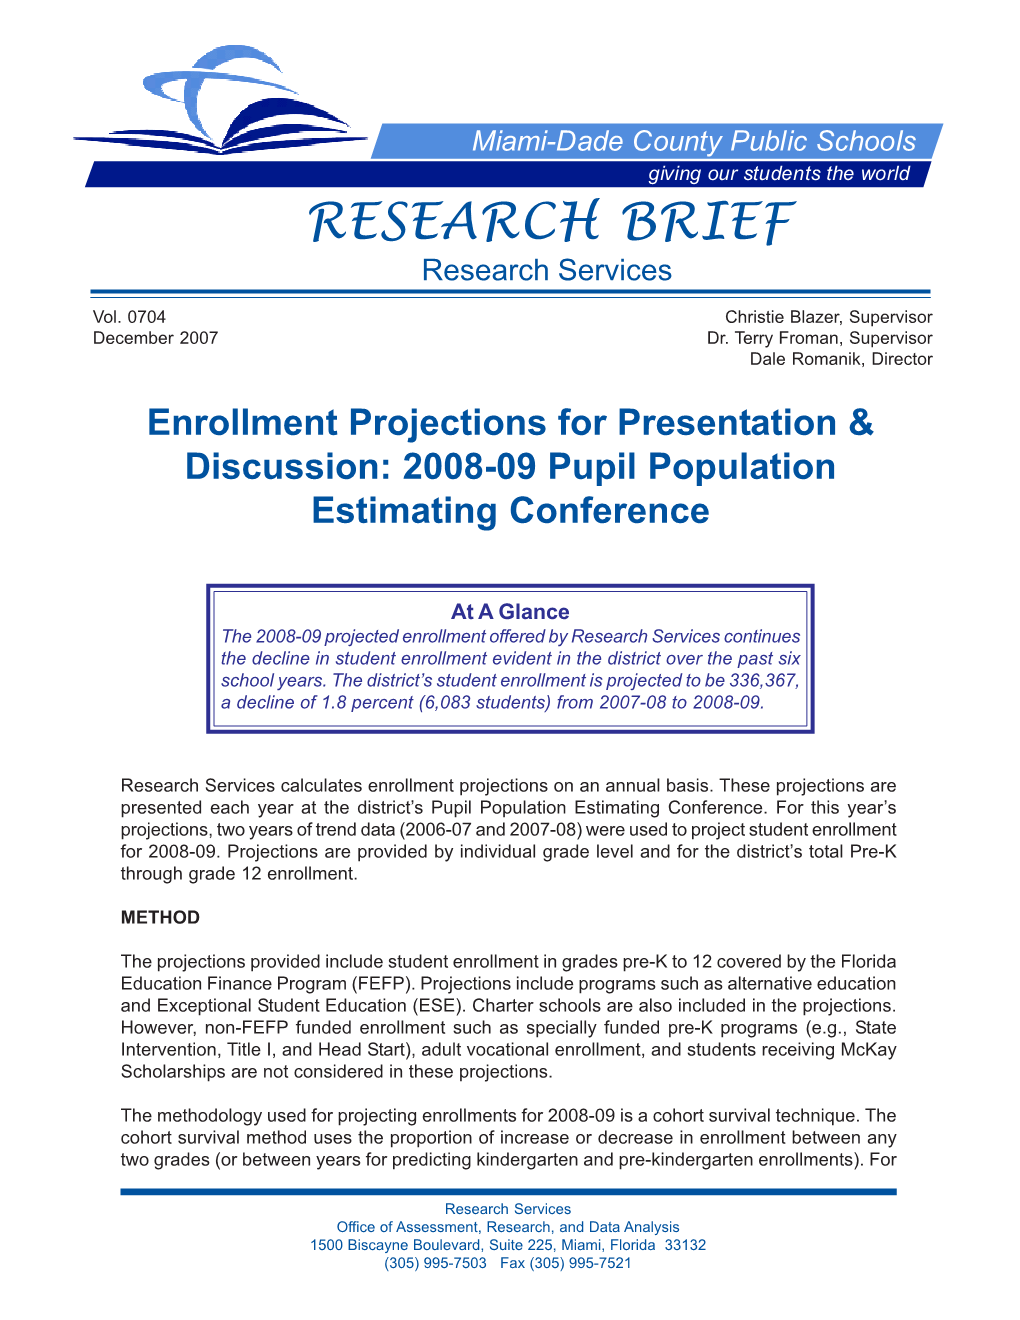 Enrollment Projections for Presentation & Discussion: 2008-09